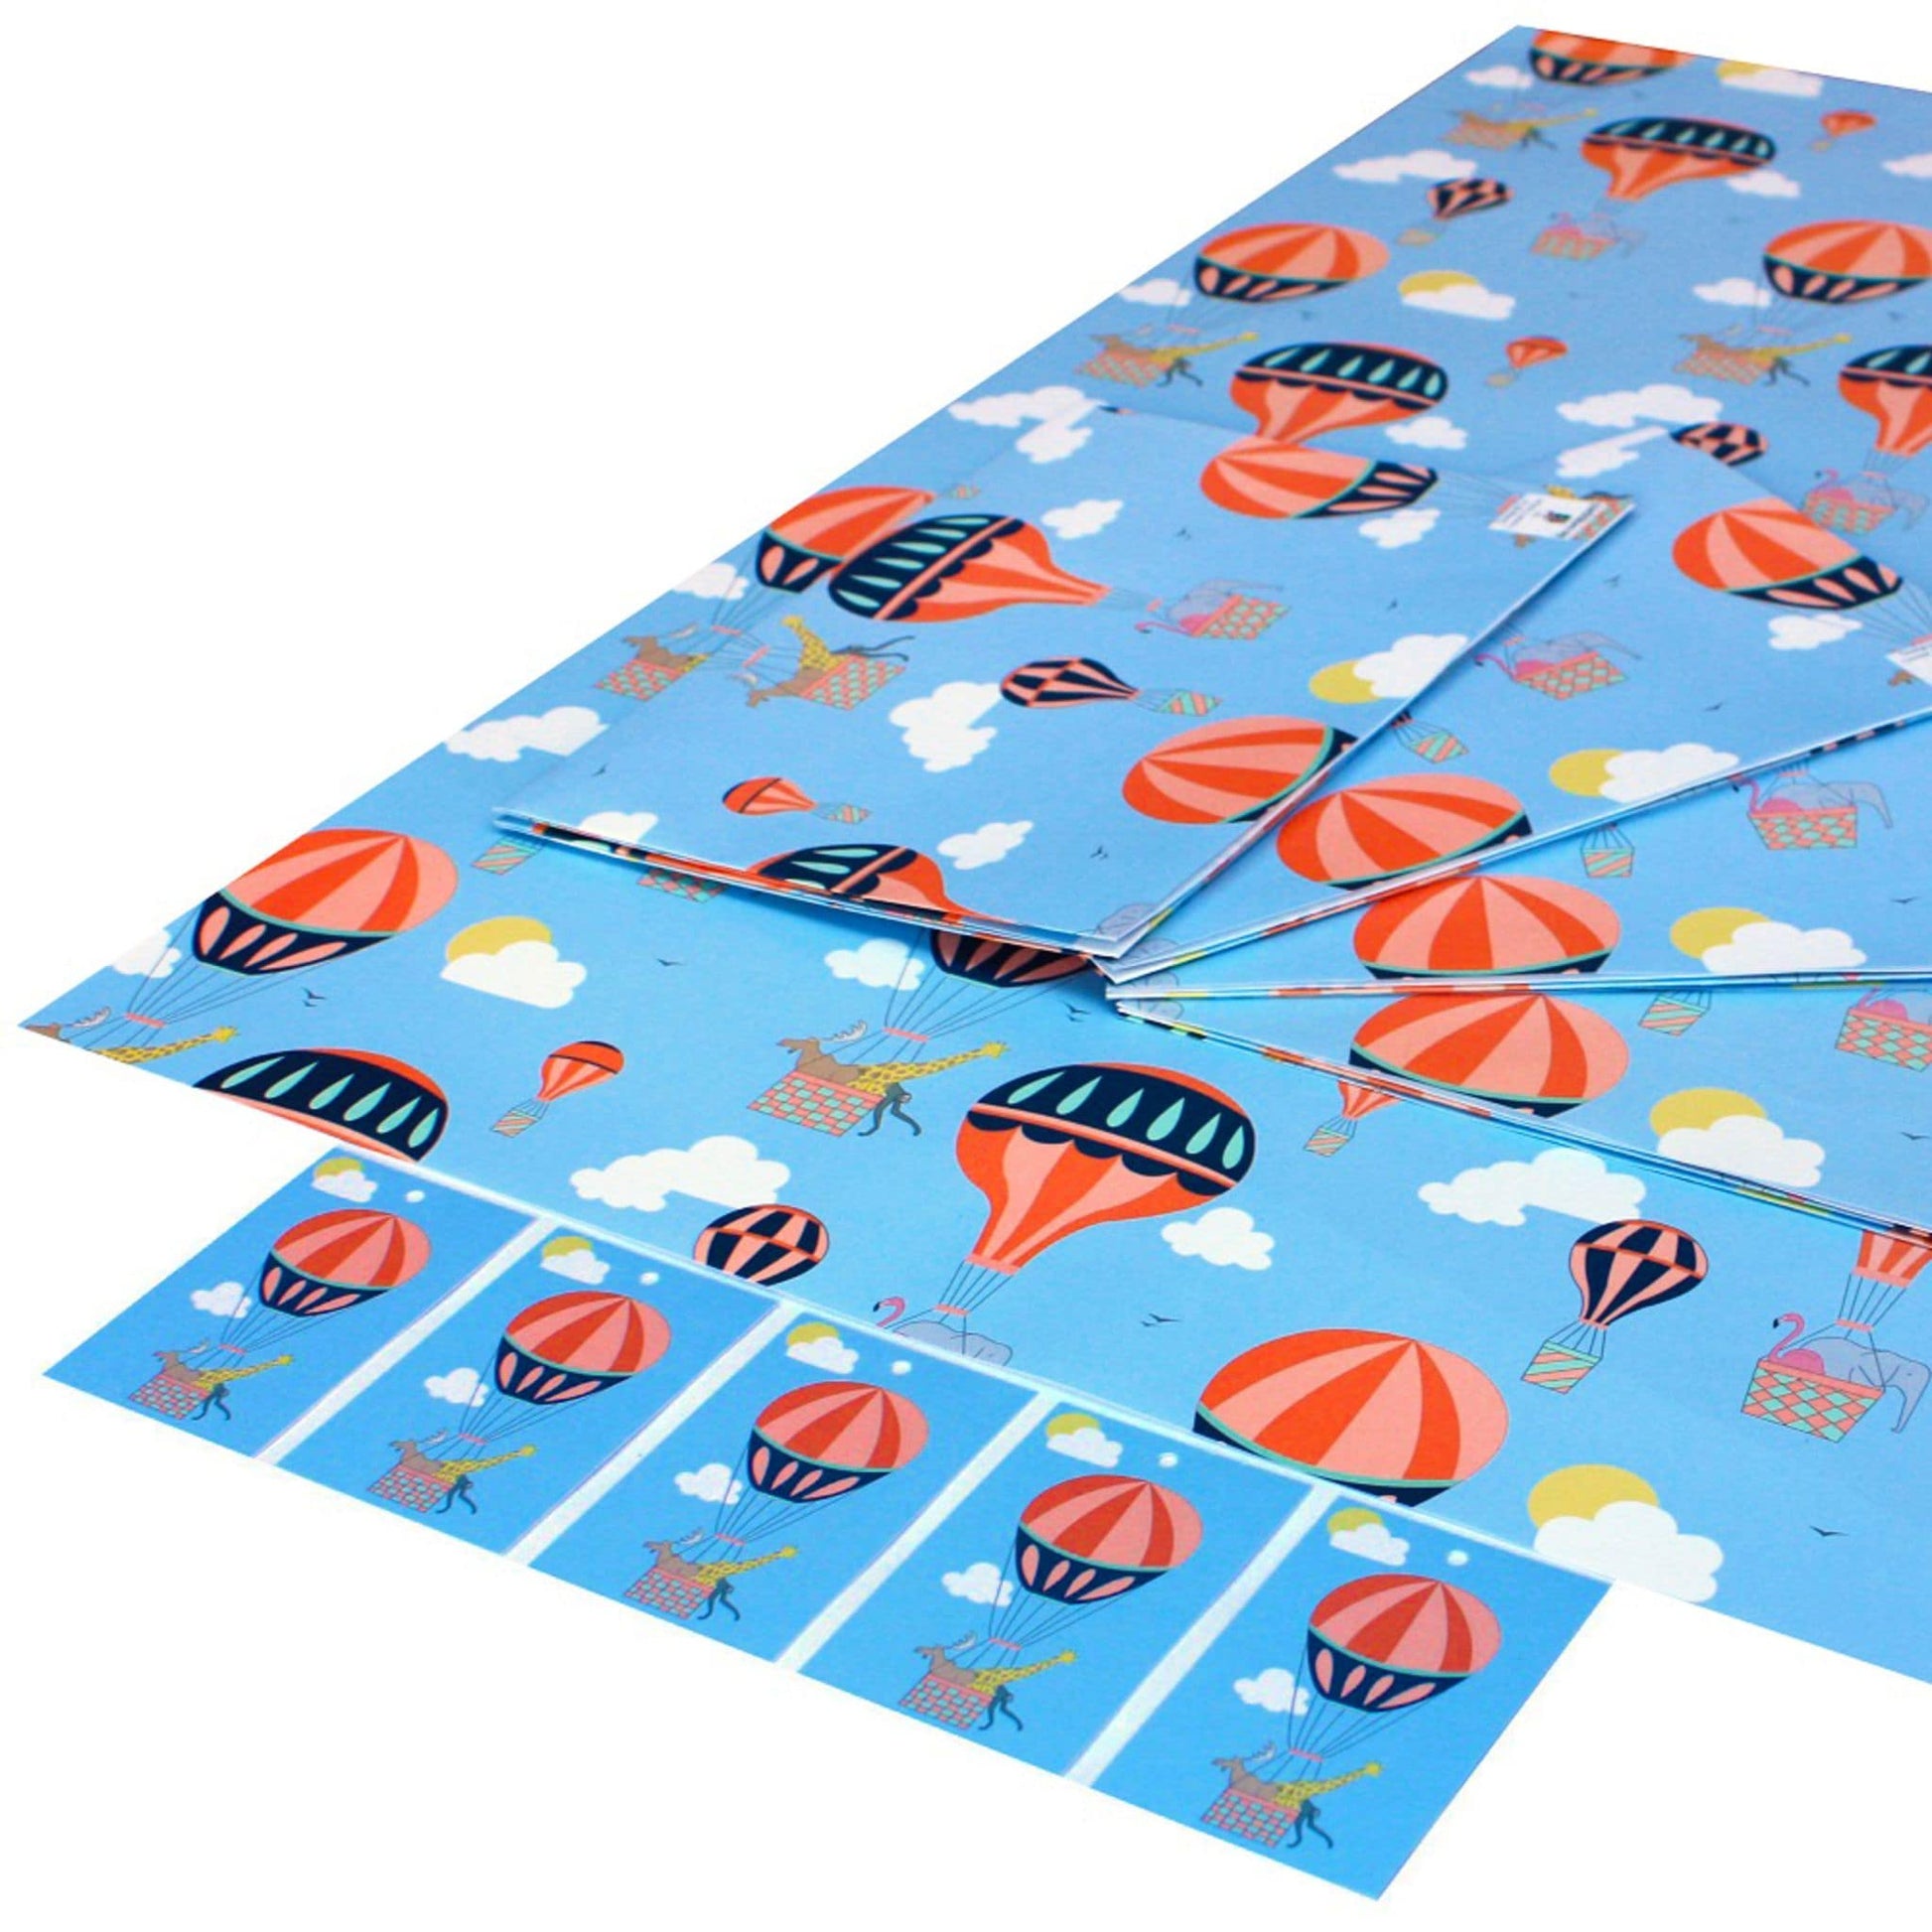 Recycled children's wrapping paper - hot air balloon gift wrap